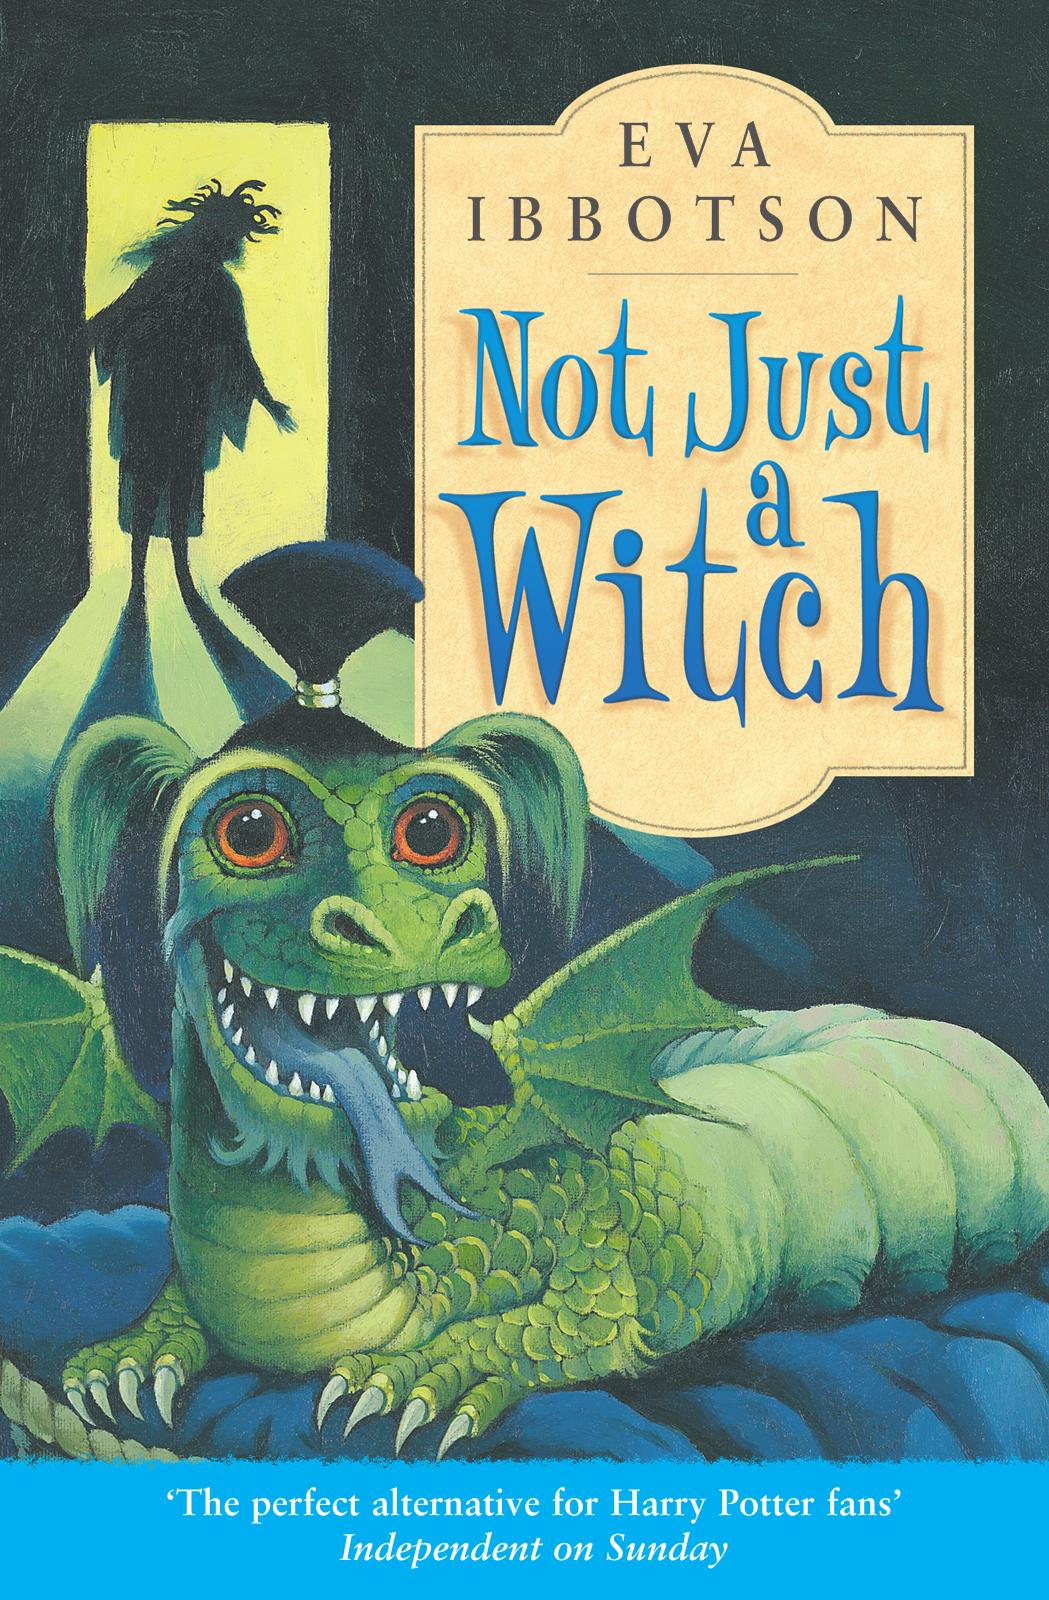 Not Just a Witch by Eva Ibbotson